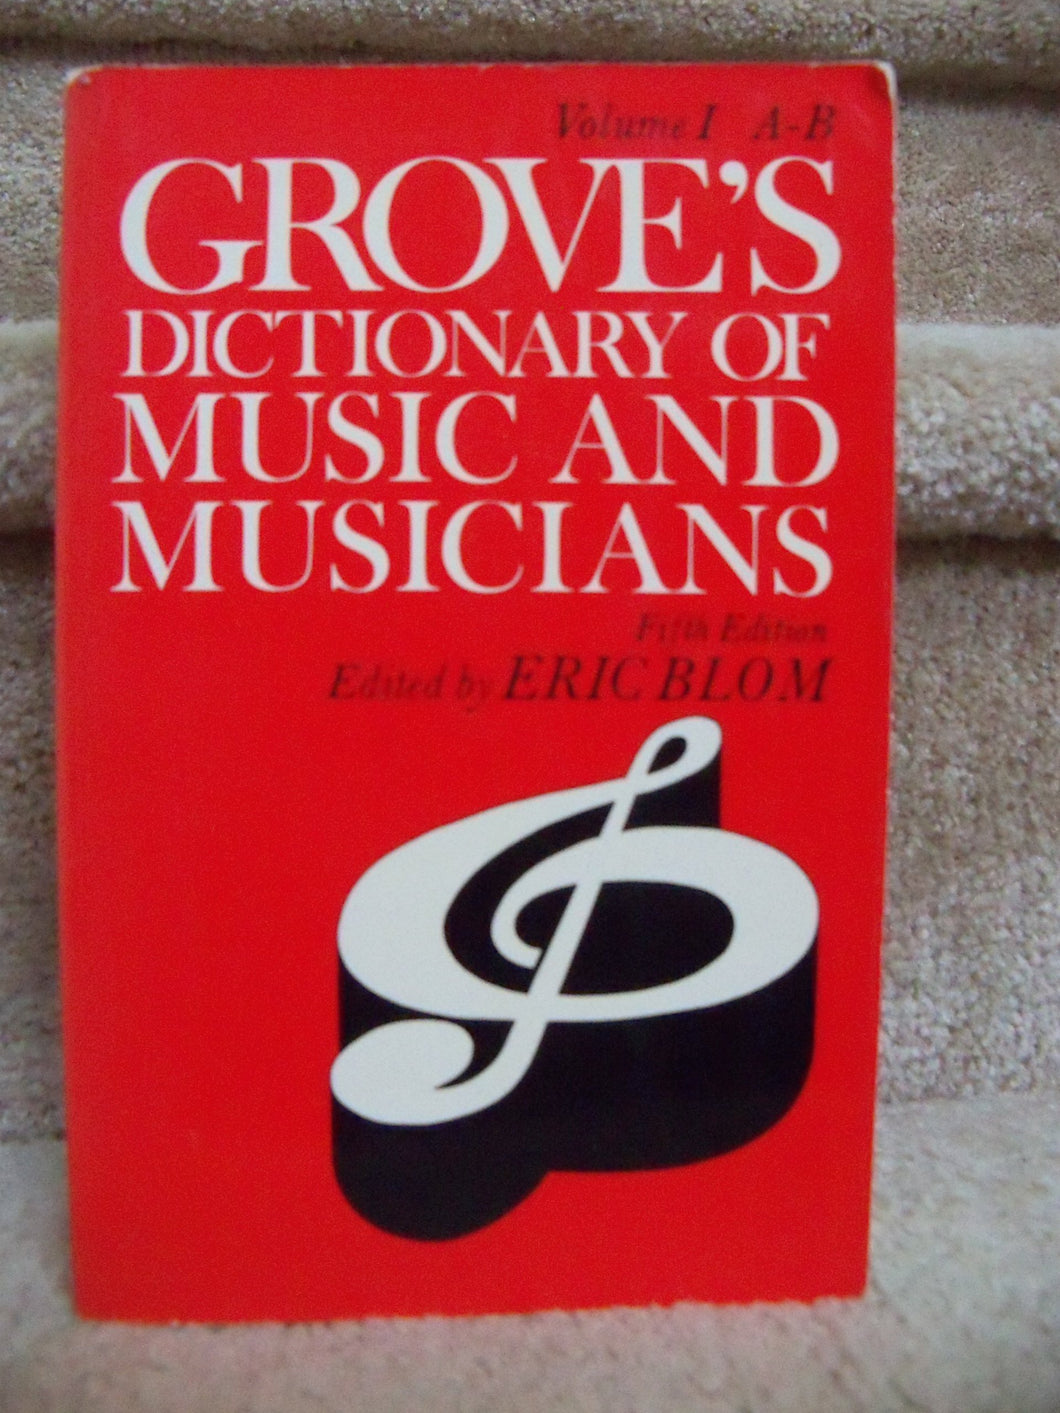 GROVES DICTIONARY OF MUSIC & MUSICIANS VOLUME 1 A [Paperback] ERIC BLOM